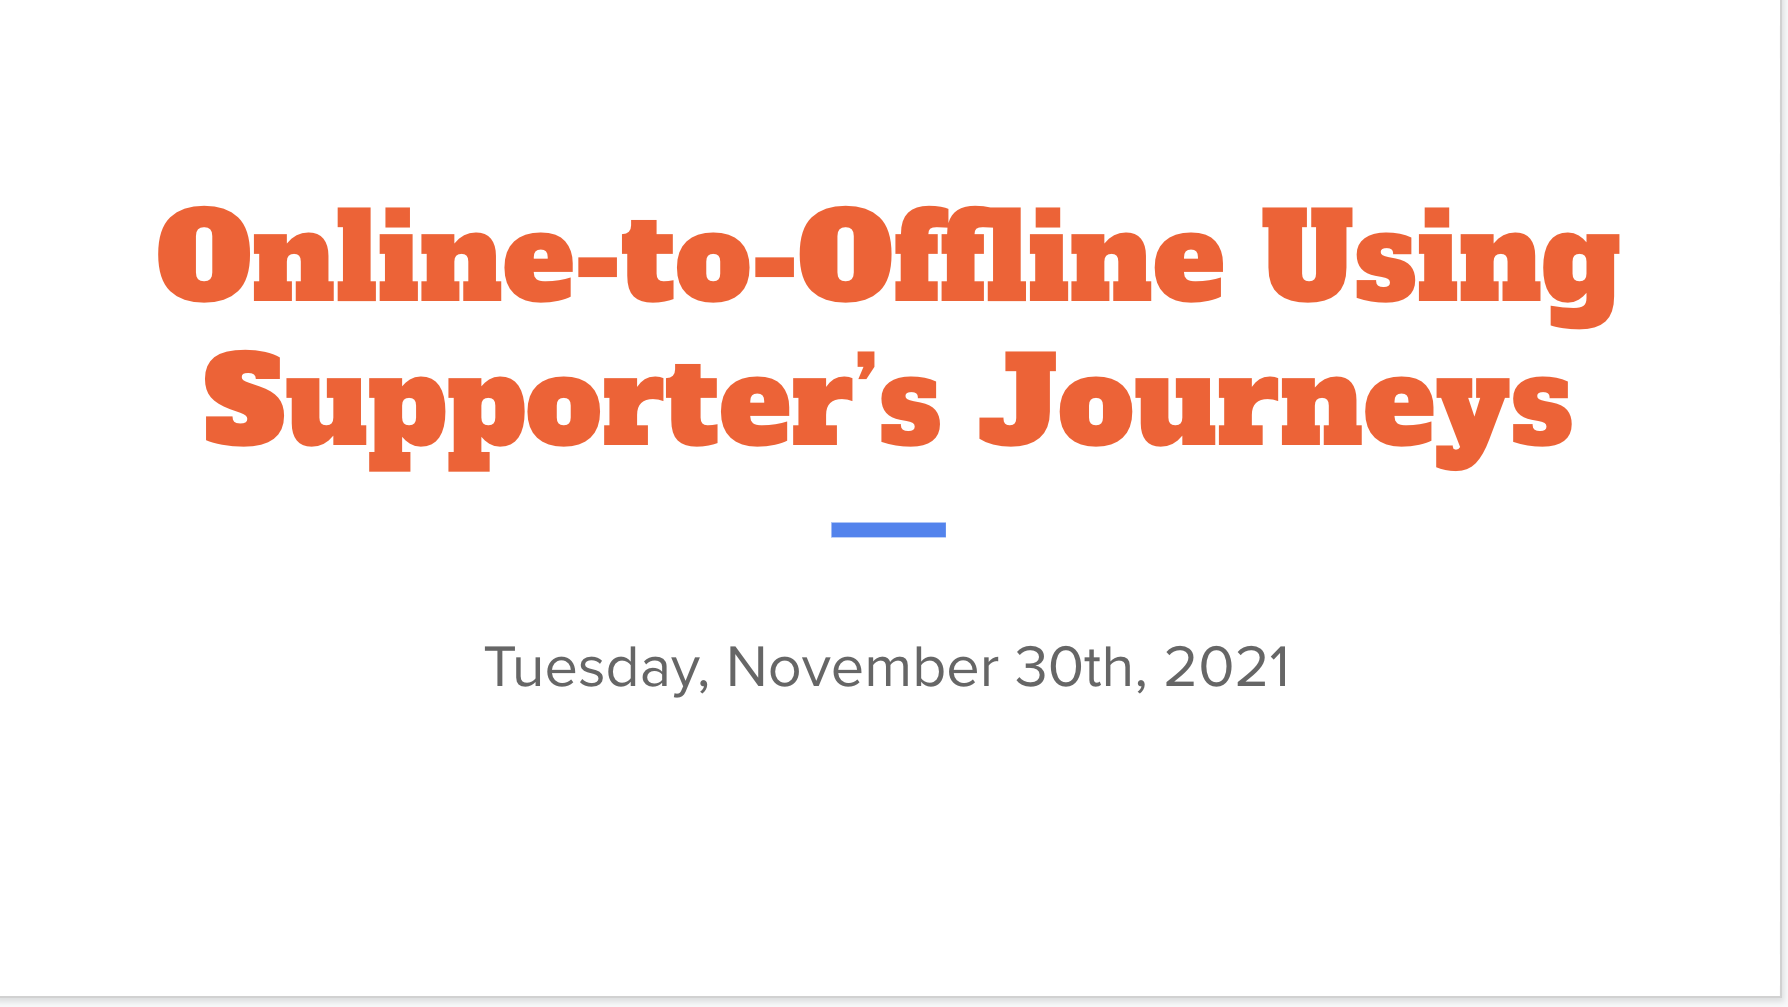 Getting Going with Online-to-Offline Organizing: The Power of a Supporter's Journey